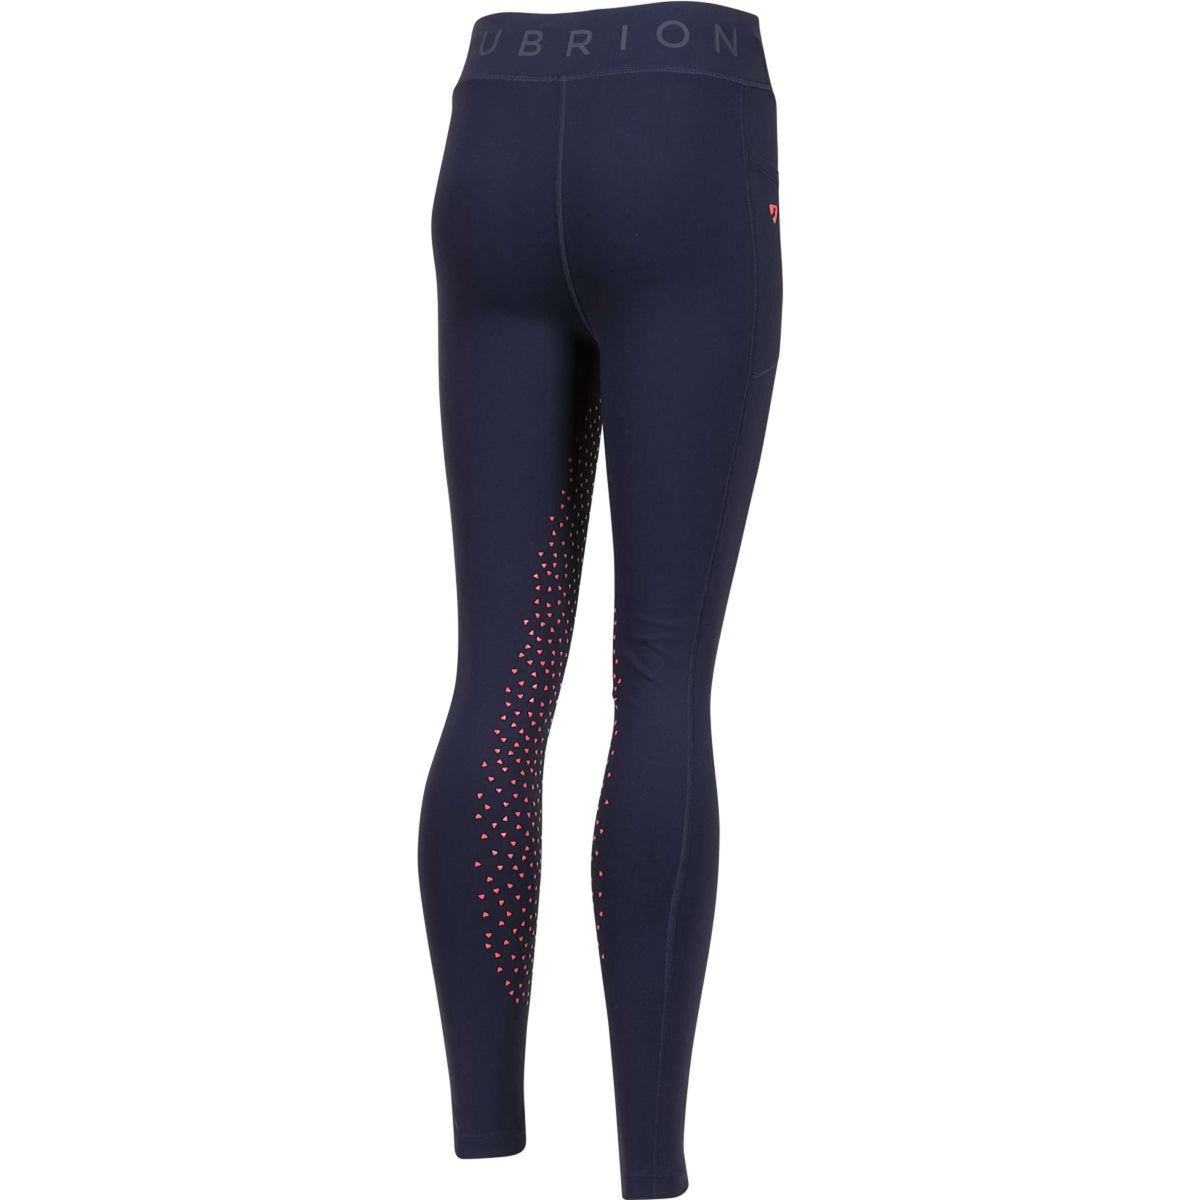 Aubrion by Shires Reitleggings Non Stop Young Rider Navy